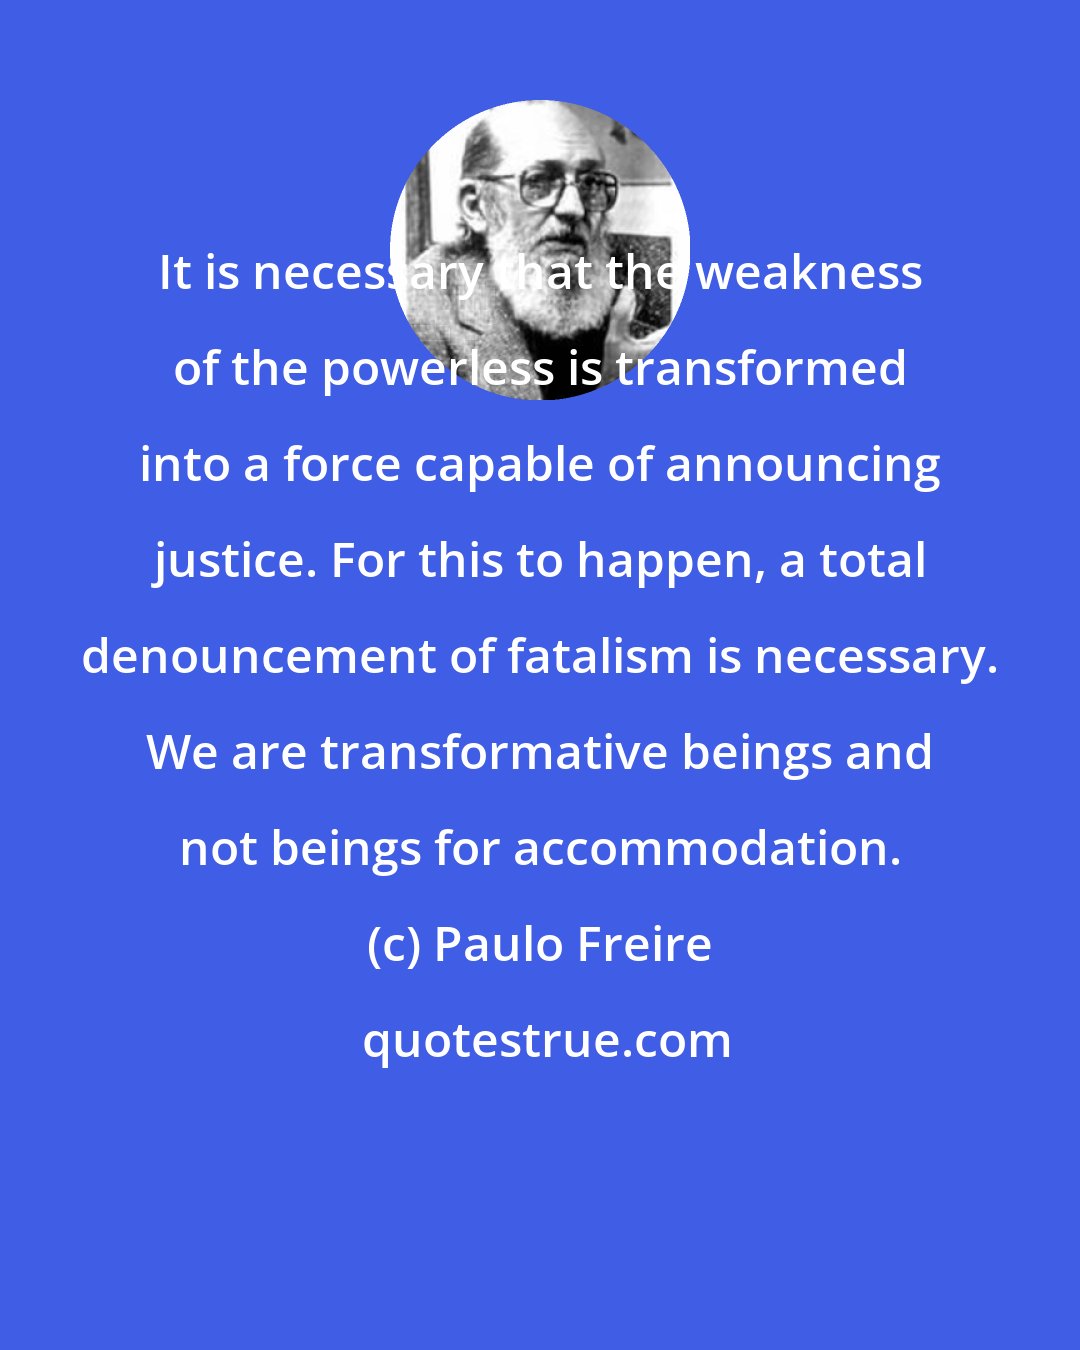 Paulo Freire: It is necessary that the weakness of the powerless is transformed into a force capable of announcing justice. For this to happen, a total denouncement of fatalism is necessary. We are transformative beings and not beings for accommodation.